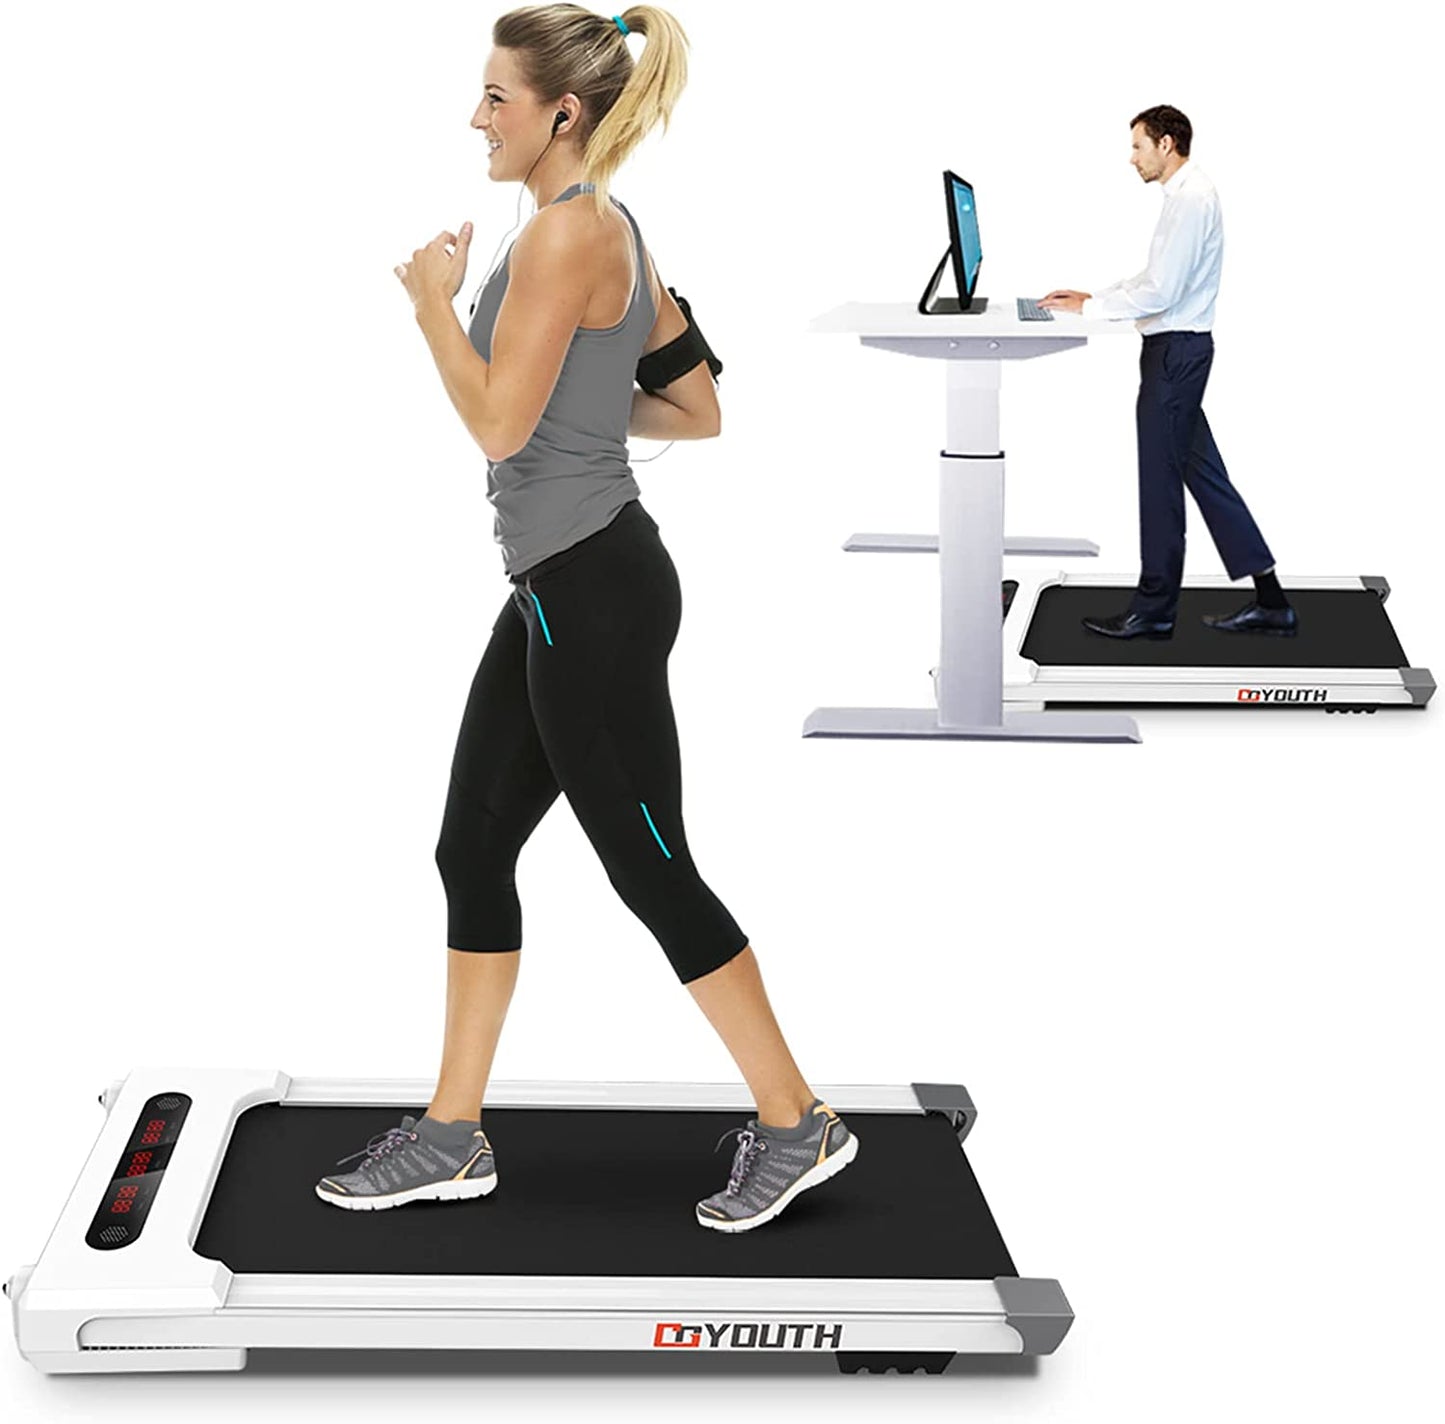 2 in 1 under Desk Electric Treadmill Motorized Exercise Machine with Wireless Speaker, Remote Control and LED Display, Walking Jogging Machine for Home/Office Use